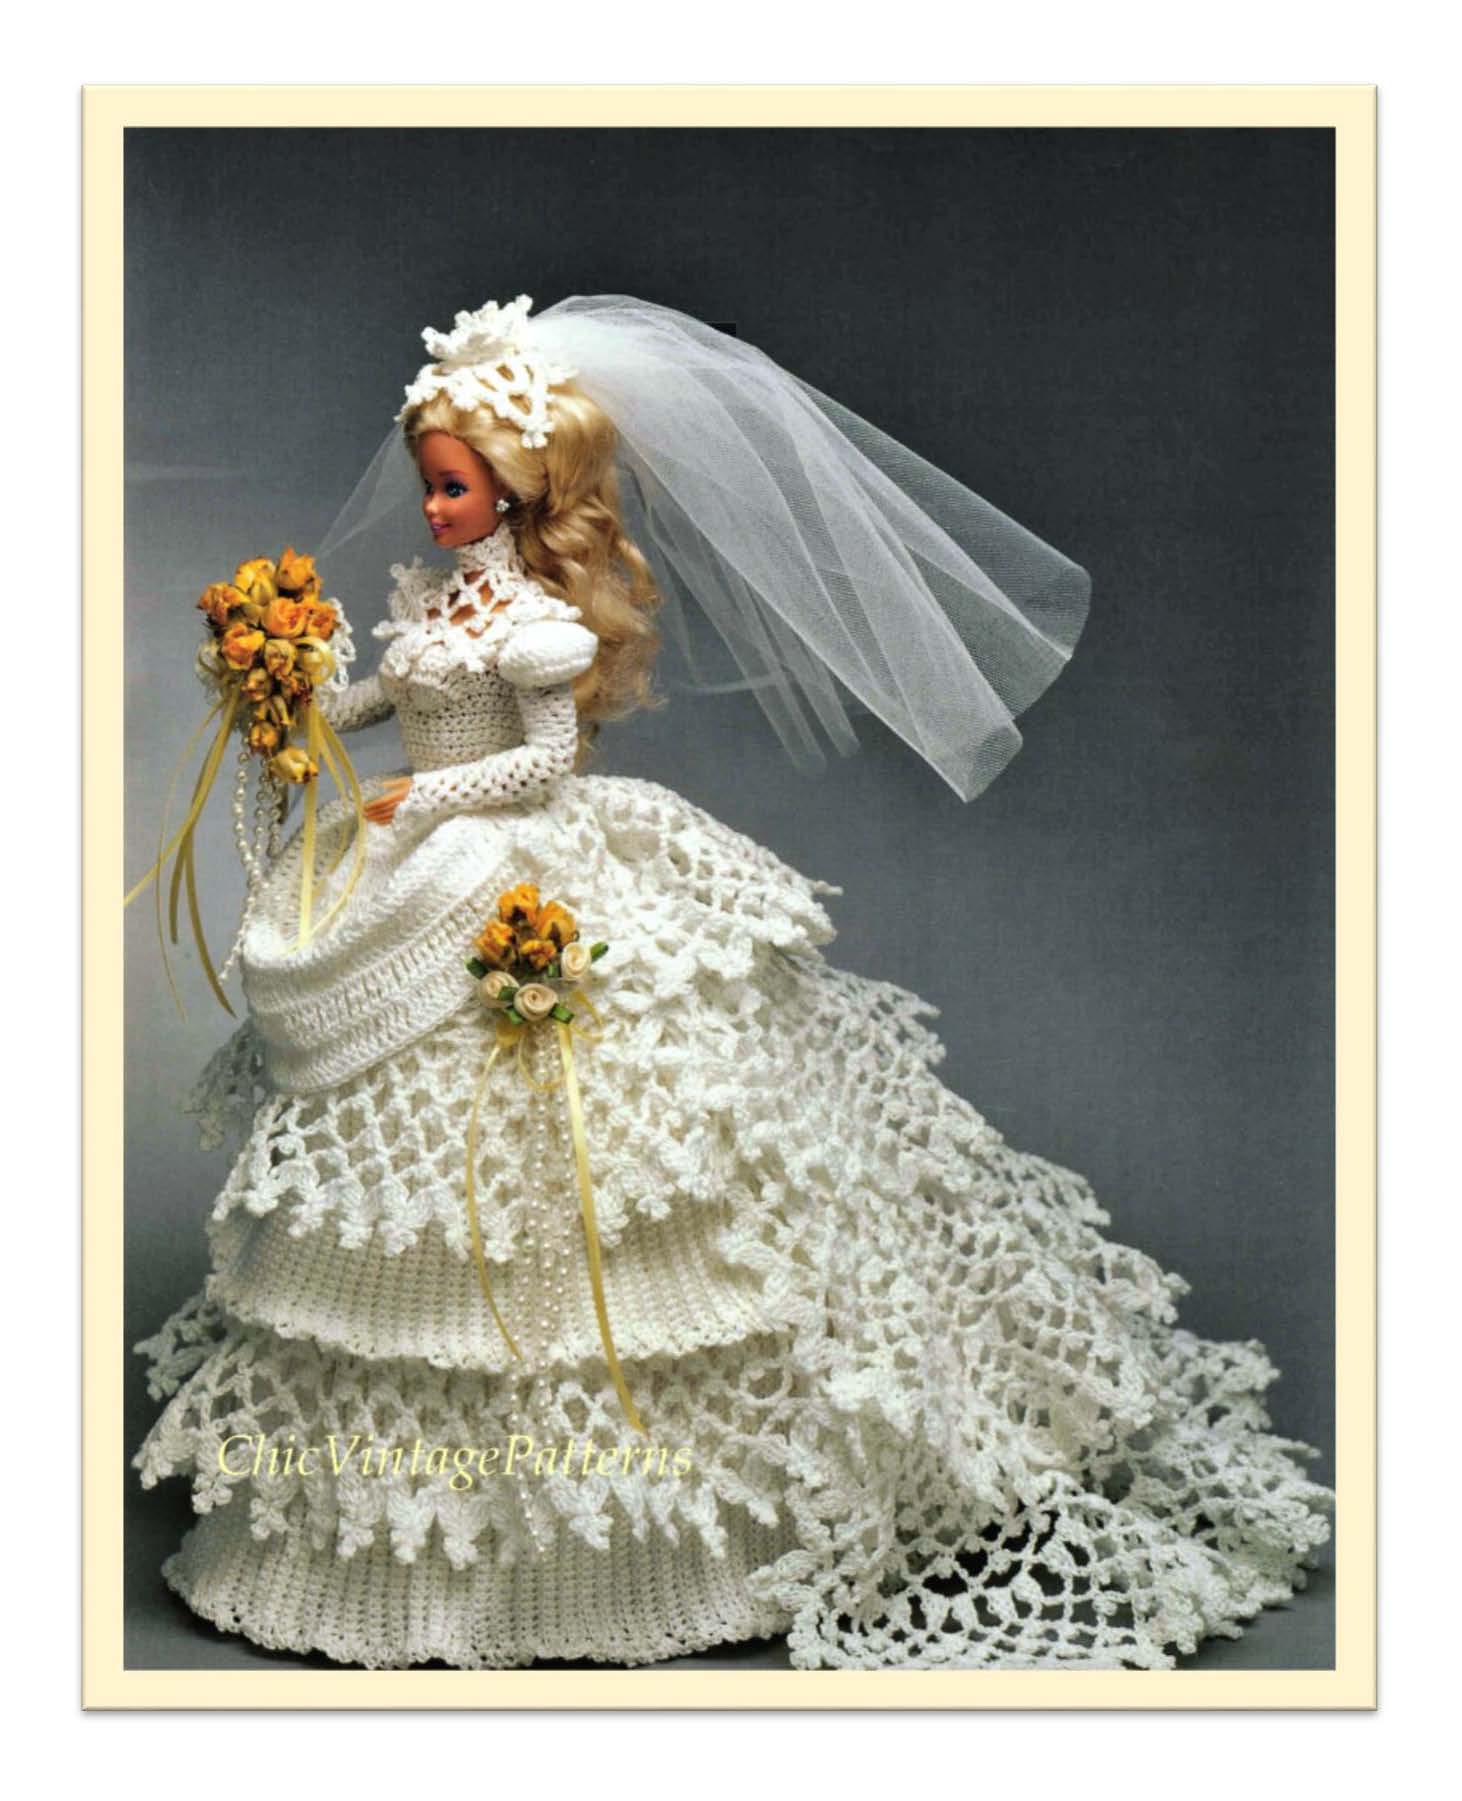 Our Favorite Wedding-Day Barbies  Barbie wedding dress, Barbie bridal, Barbie  wedding